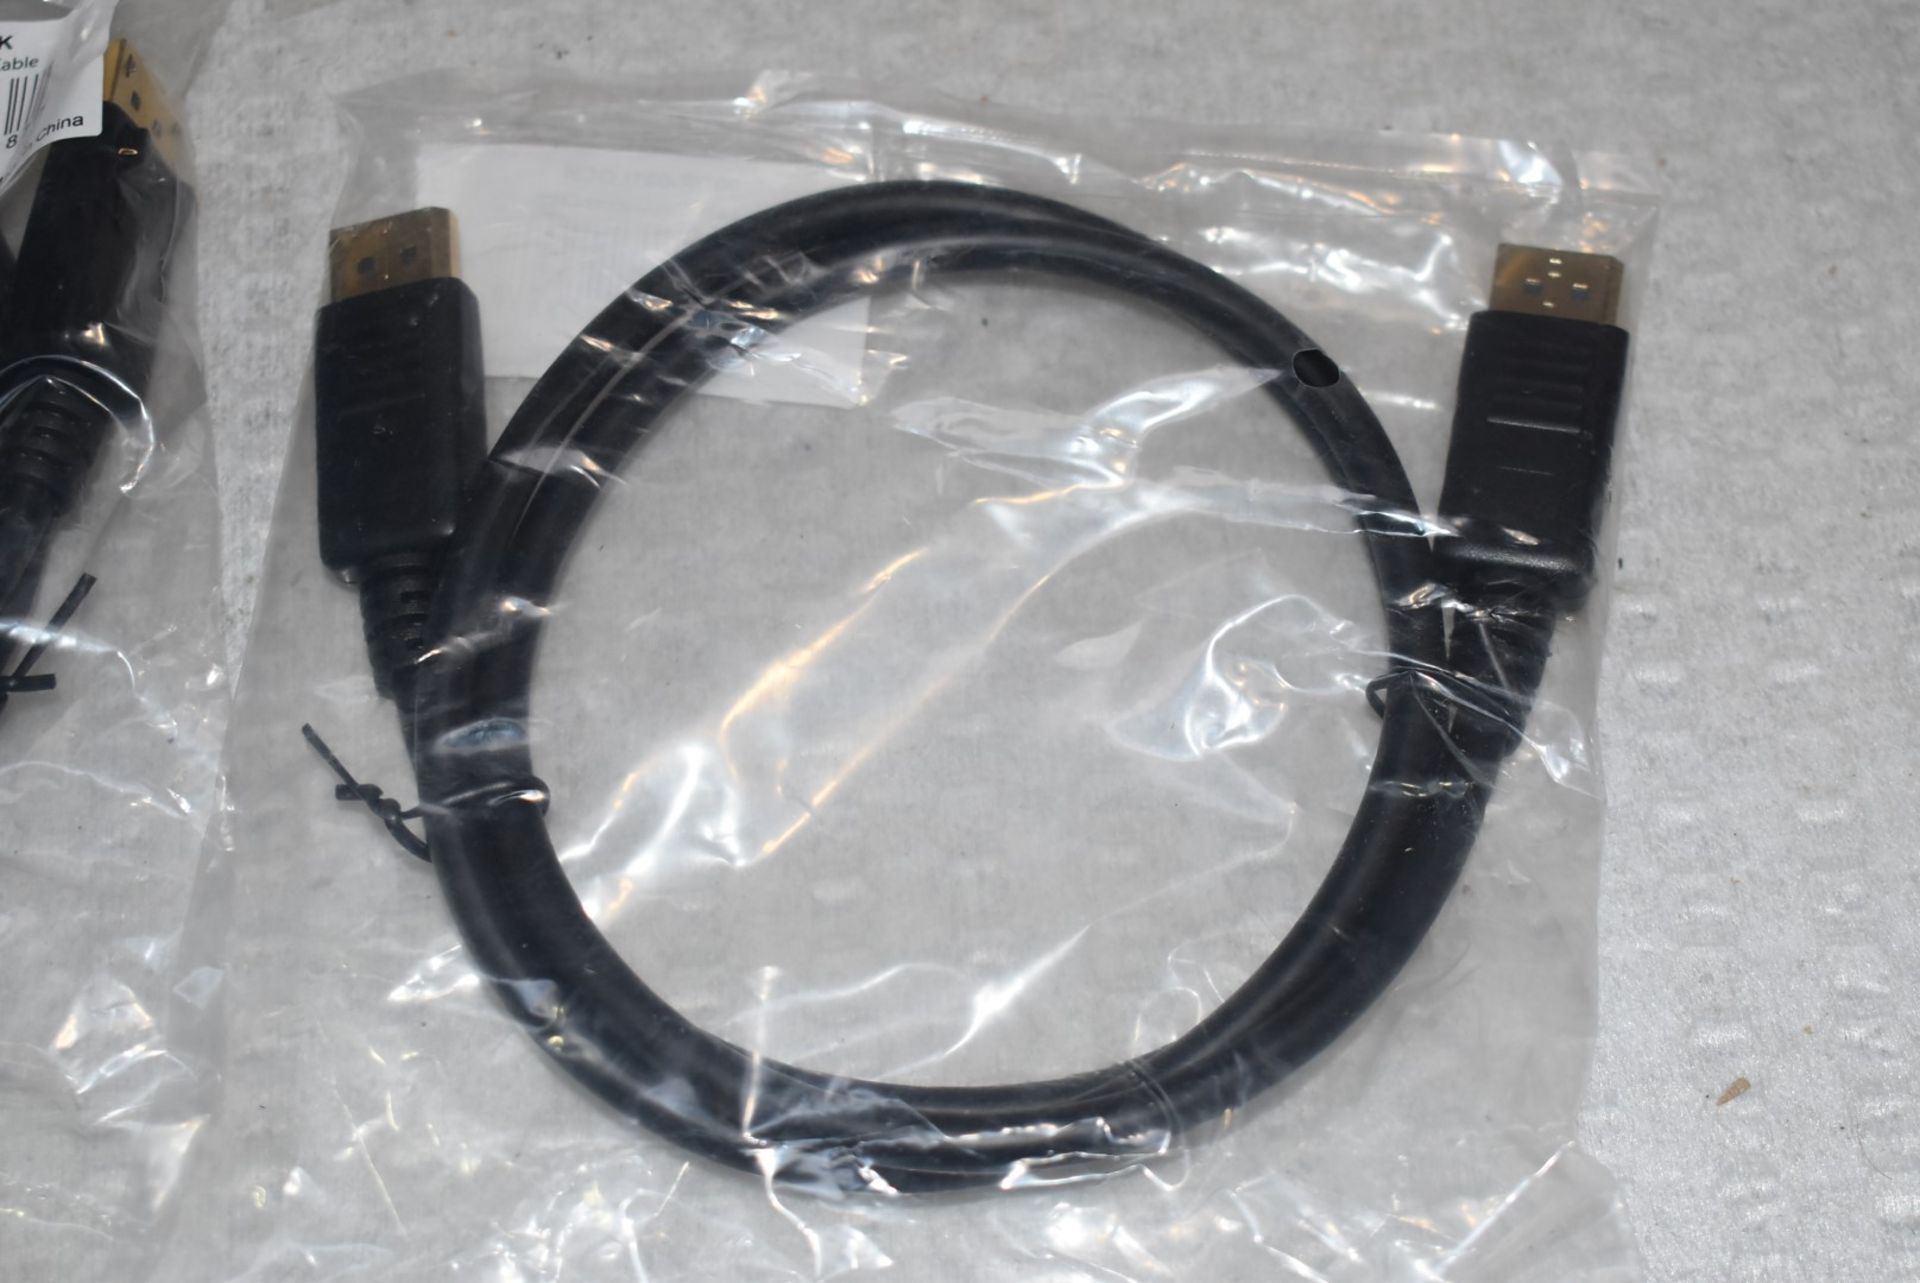 4 x DisplayPort 1 Meter Monitor Cables - New in Packets - Image 3 of 7